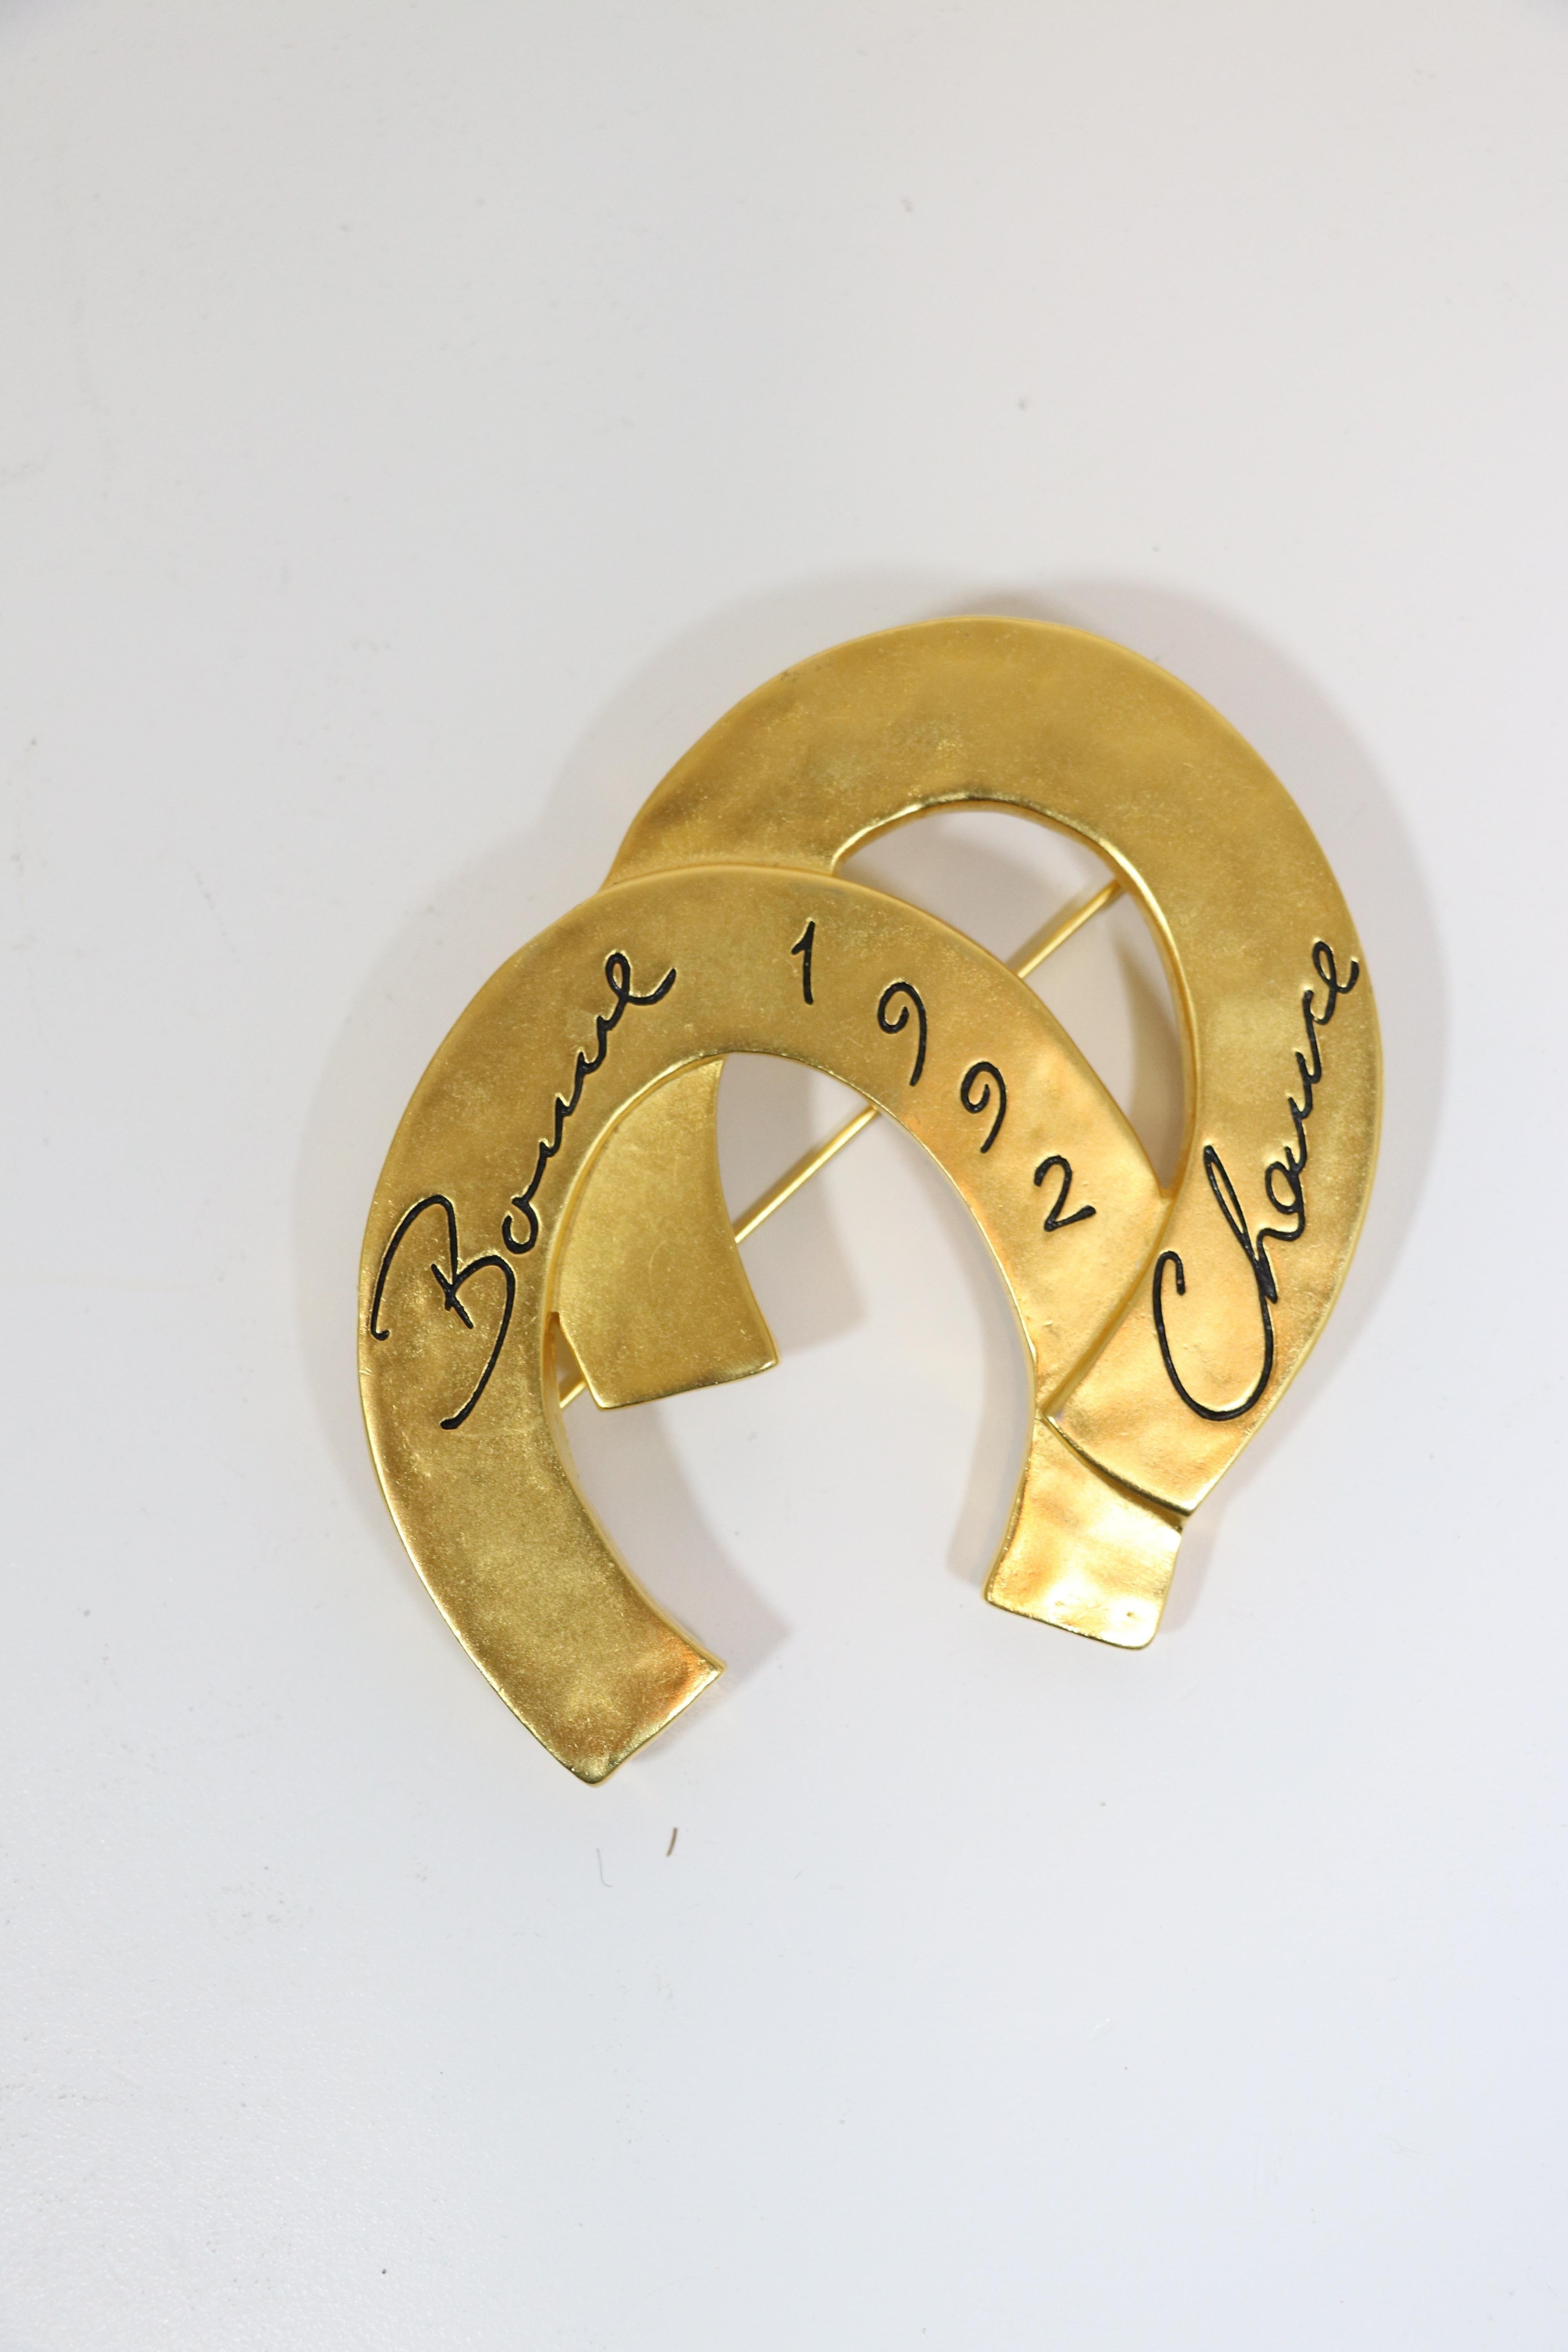 Massive brushed gold-tone vintage 1992 brooch by the late and iconic Karl Lagerfeld presents two massive horseshoes that say 